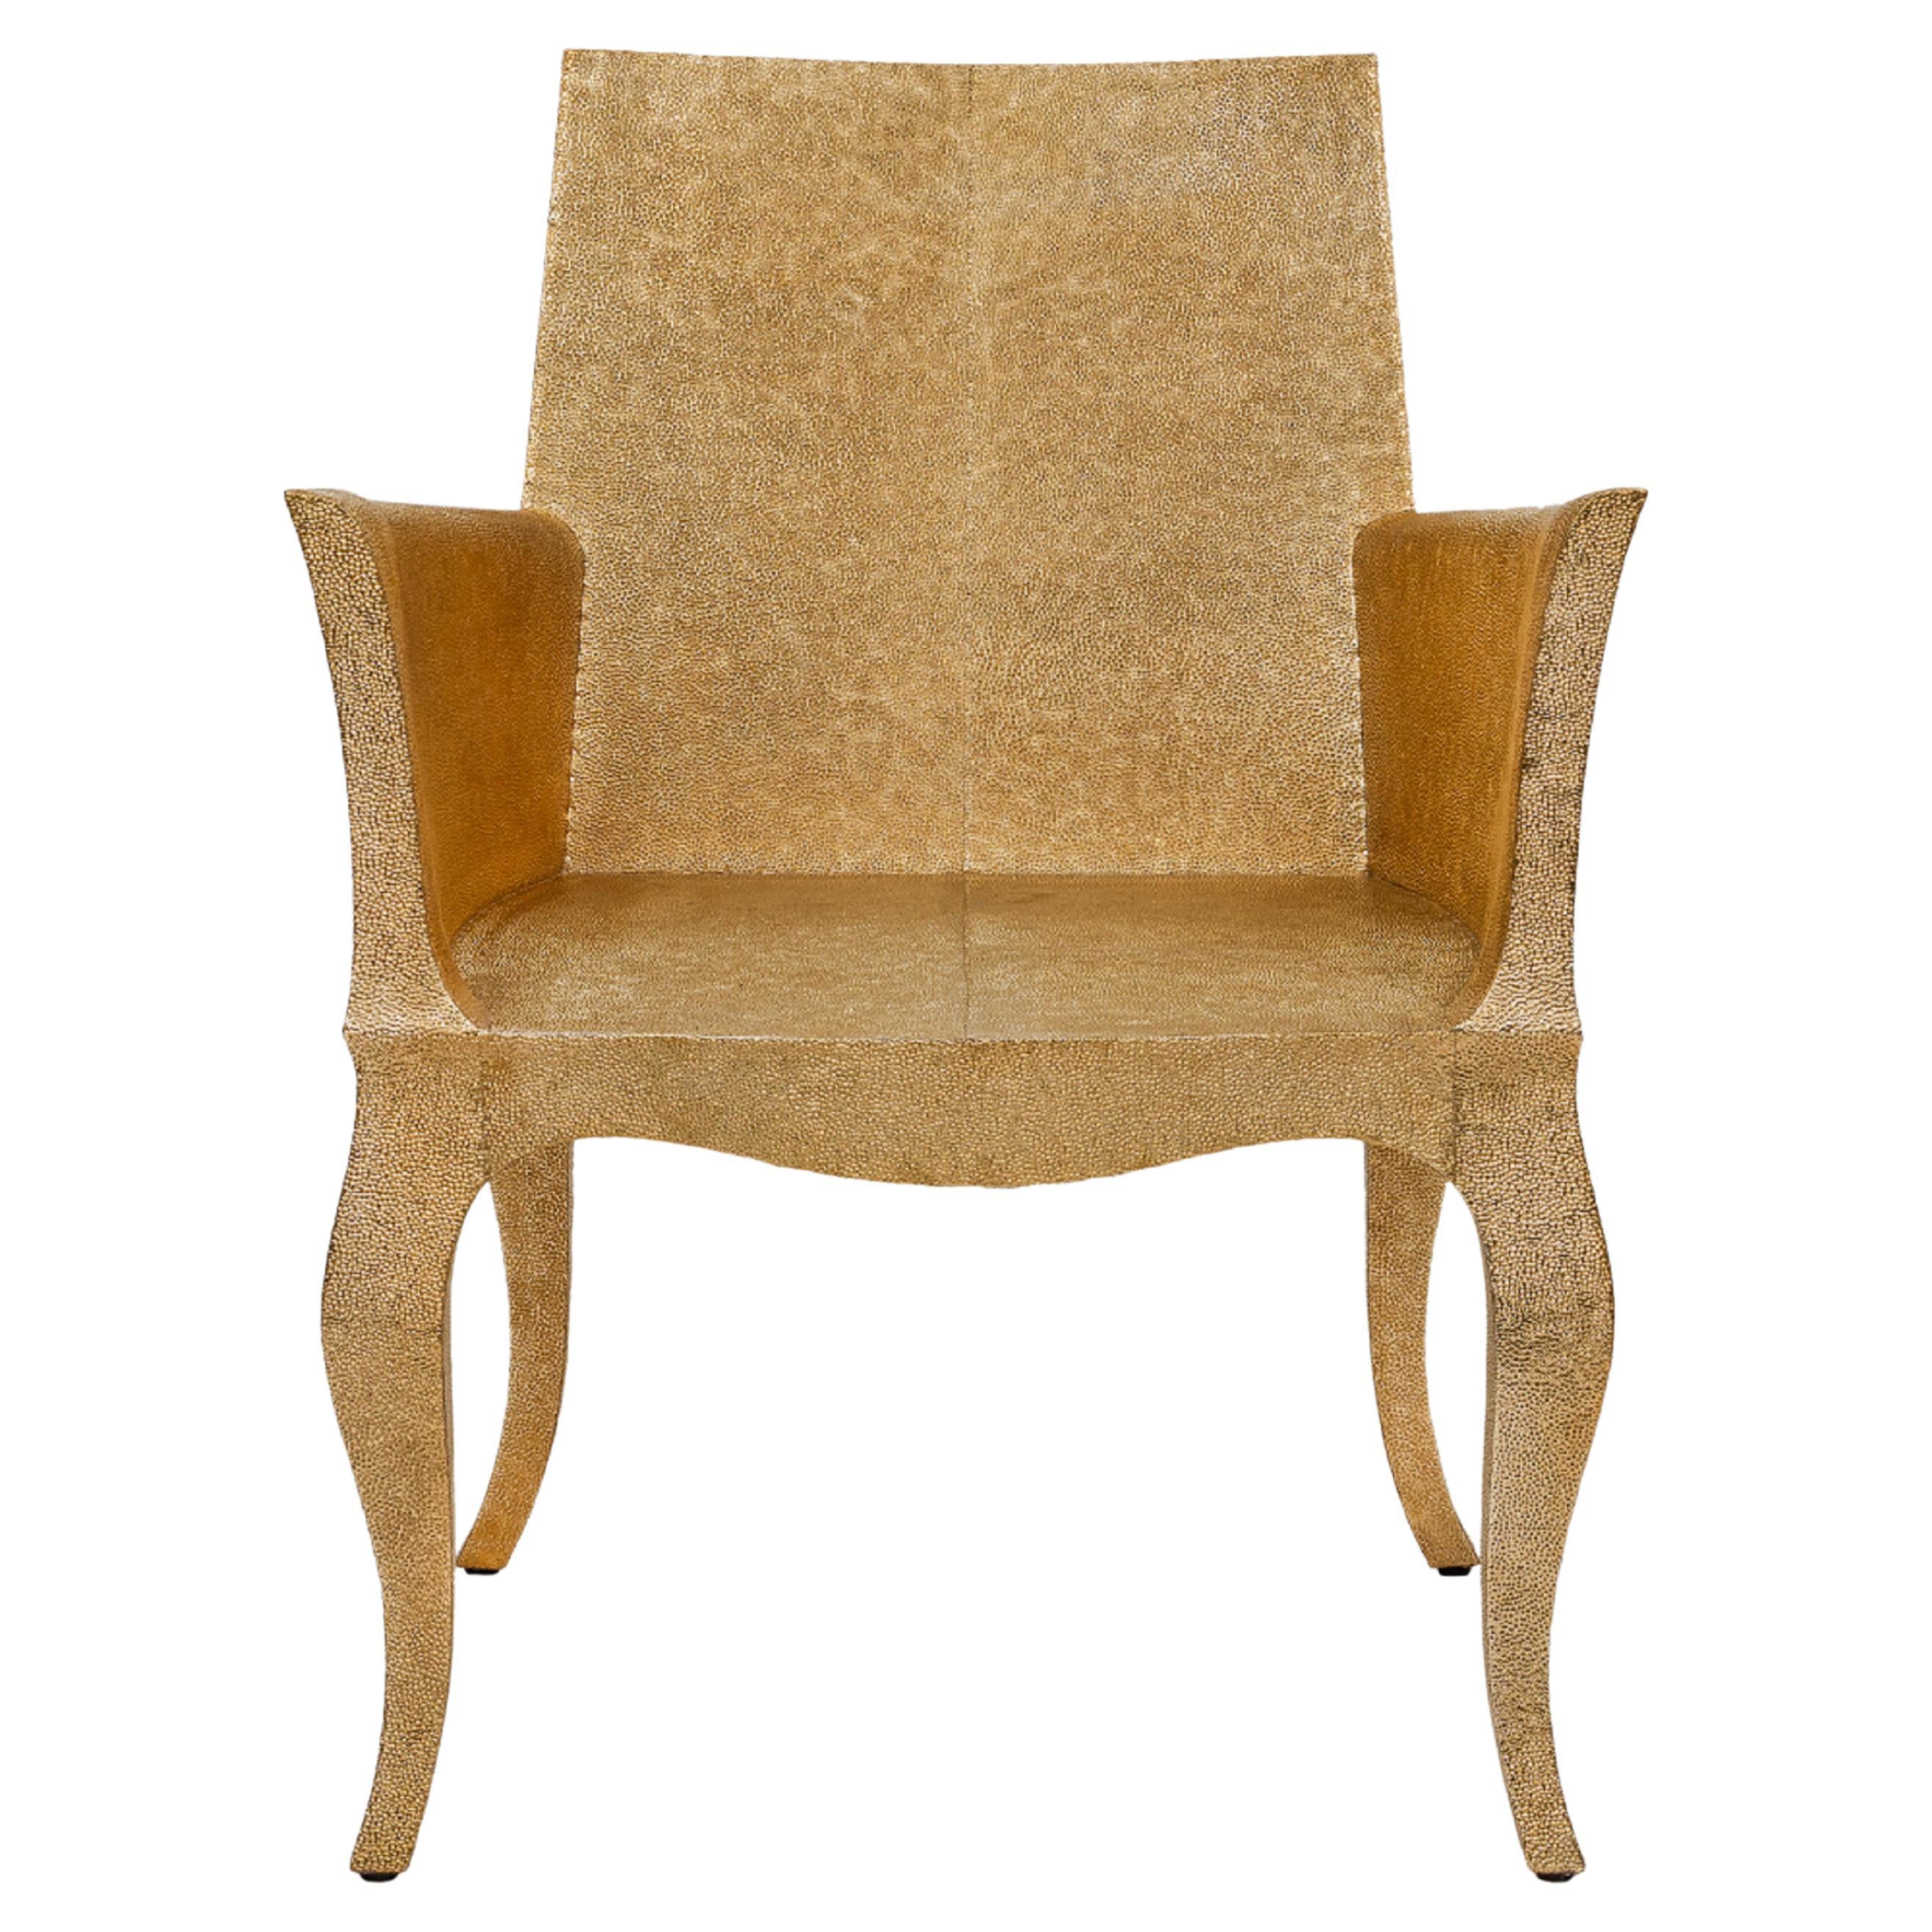 Art Deco Style Chairs Mid Hammered in Brass by Paul Mathieu